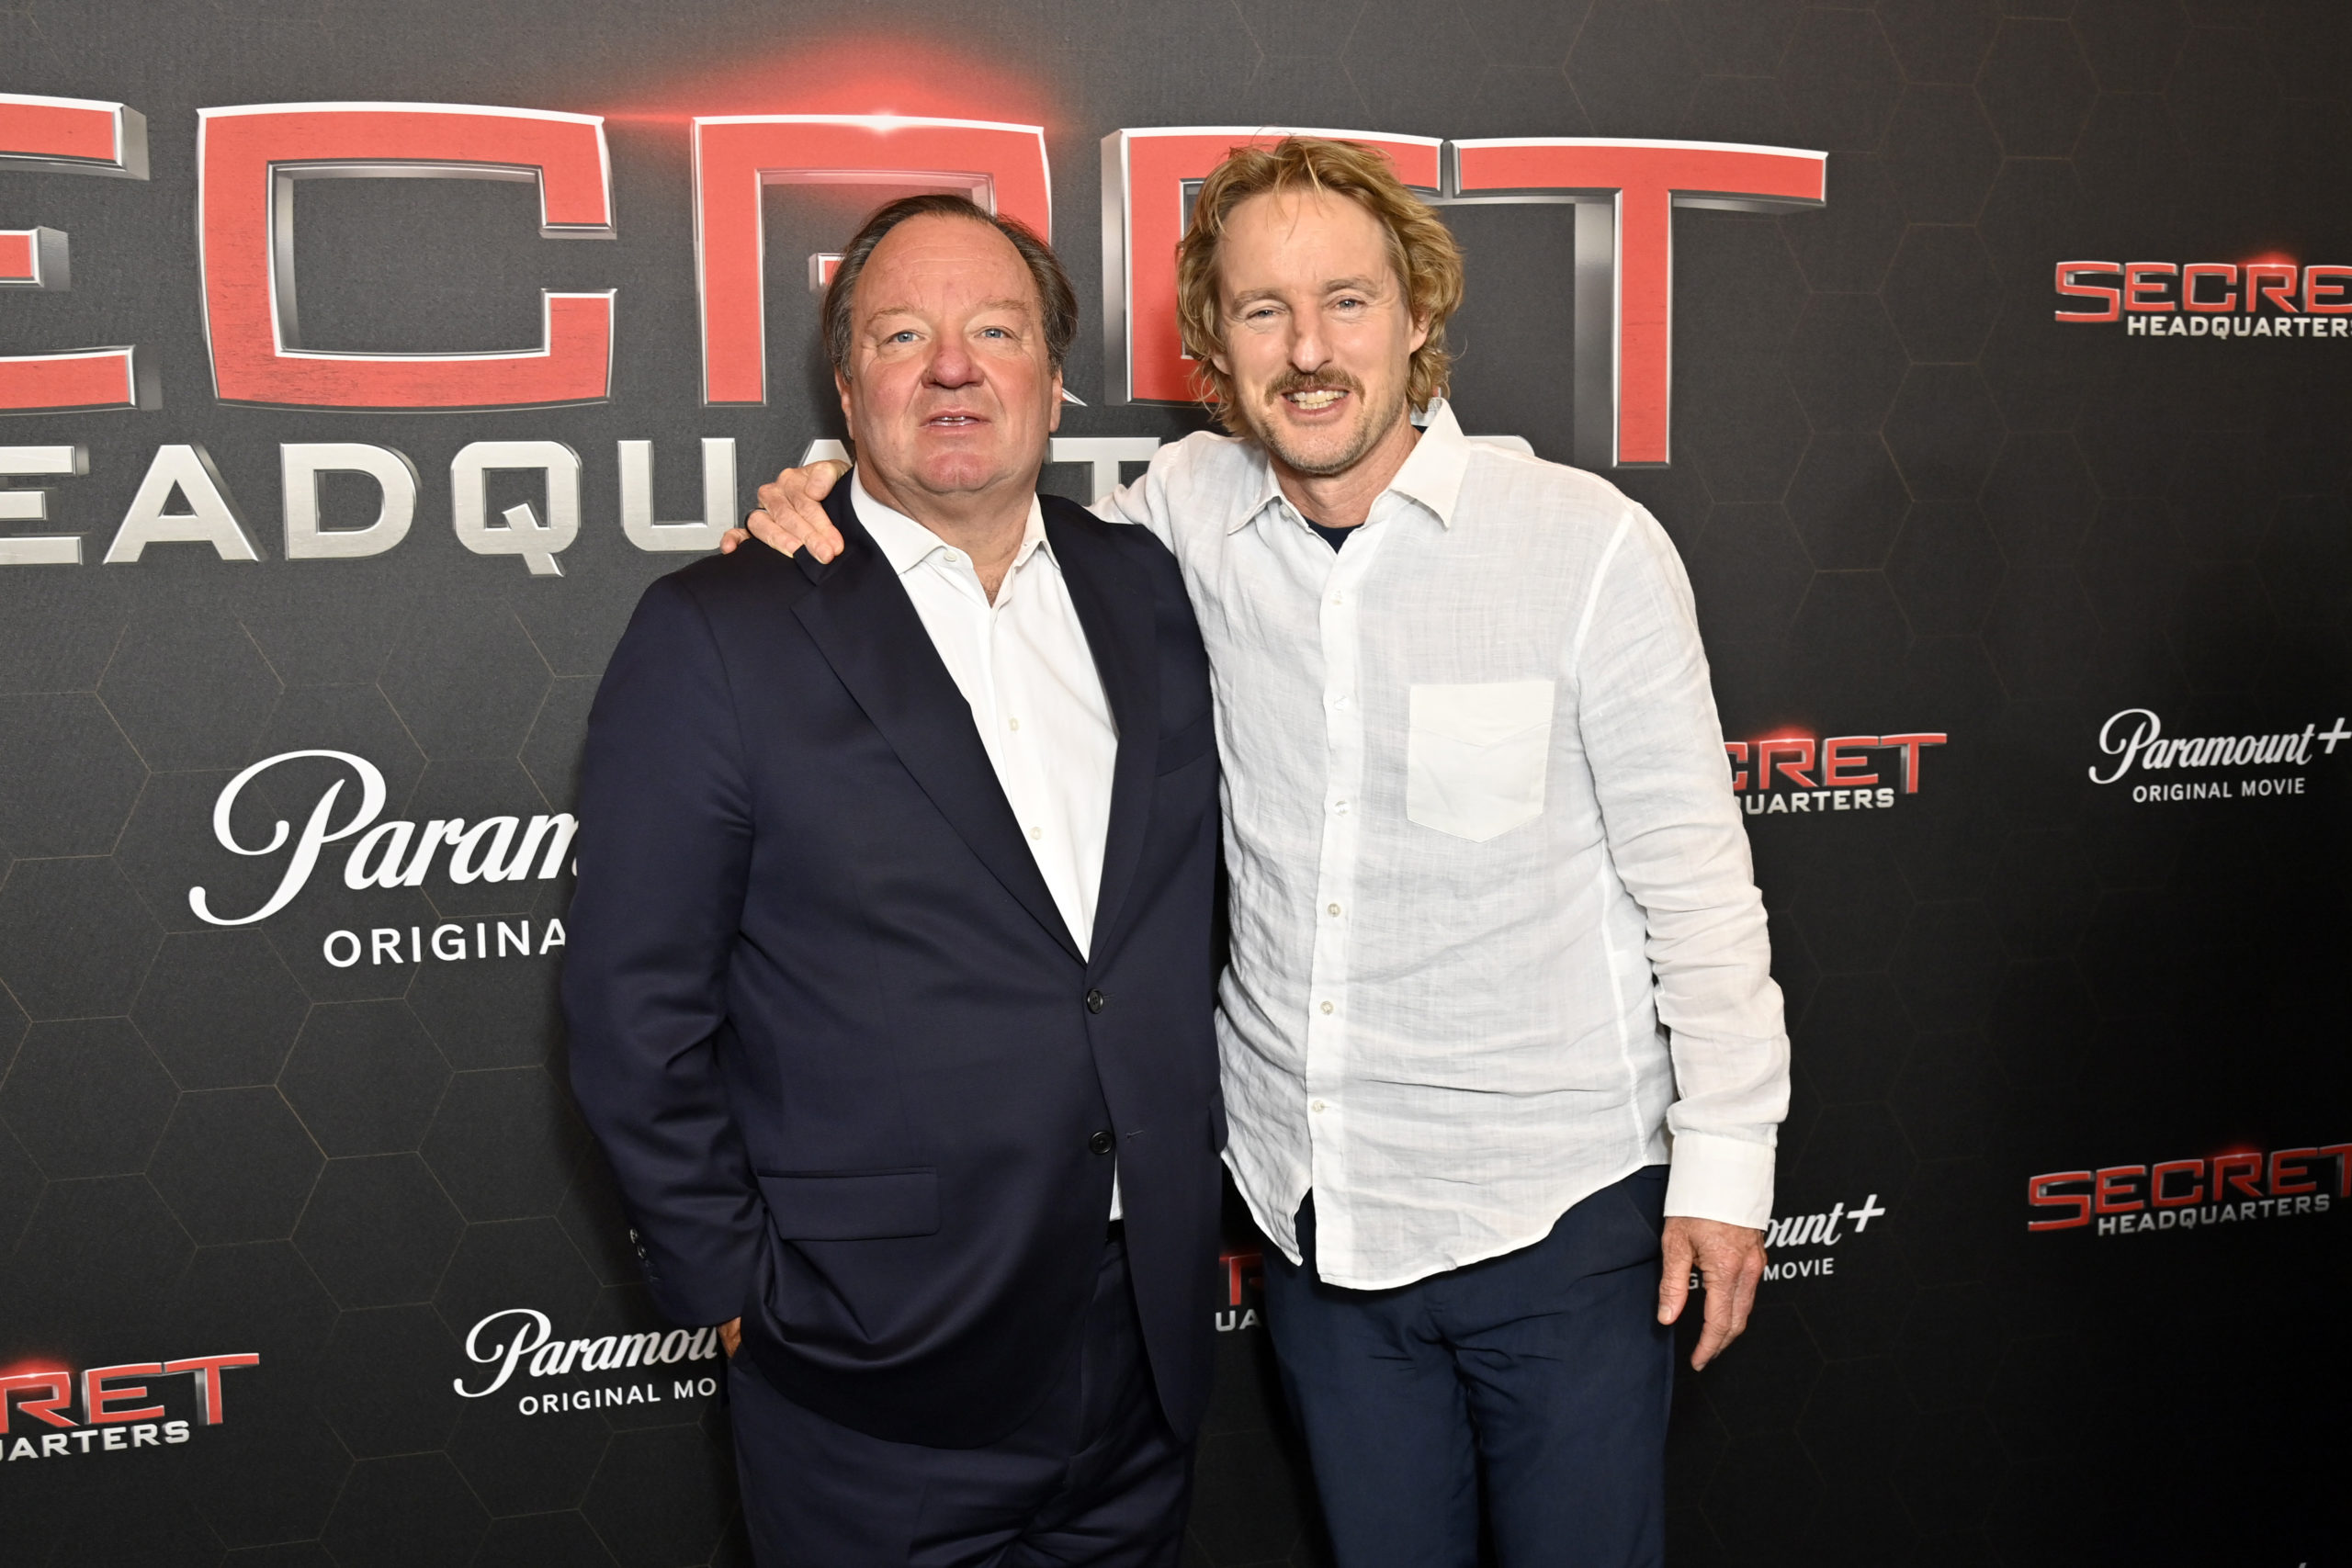 NEW YORK, NEW YORK - AUGUST 08: Paramount CEO Bob Bakish and actor Owen Wilson attend the Paramount+ 'Secret Headquarters' premiere at Signature Theater on August 08, 2022 in New York City. Bryan Bedder/Getty Images for Paramount+